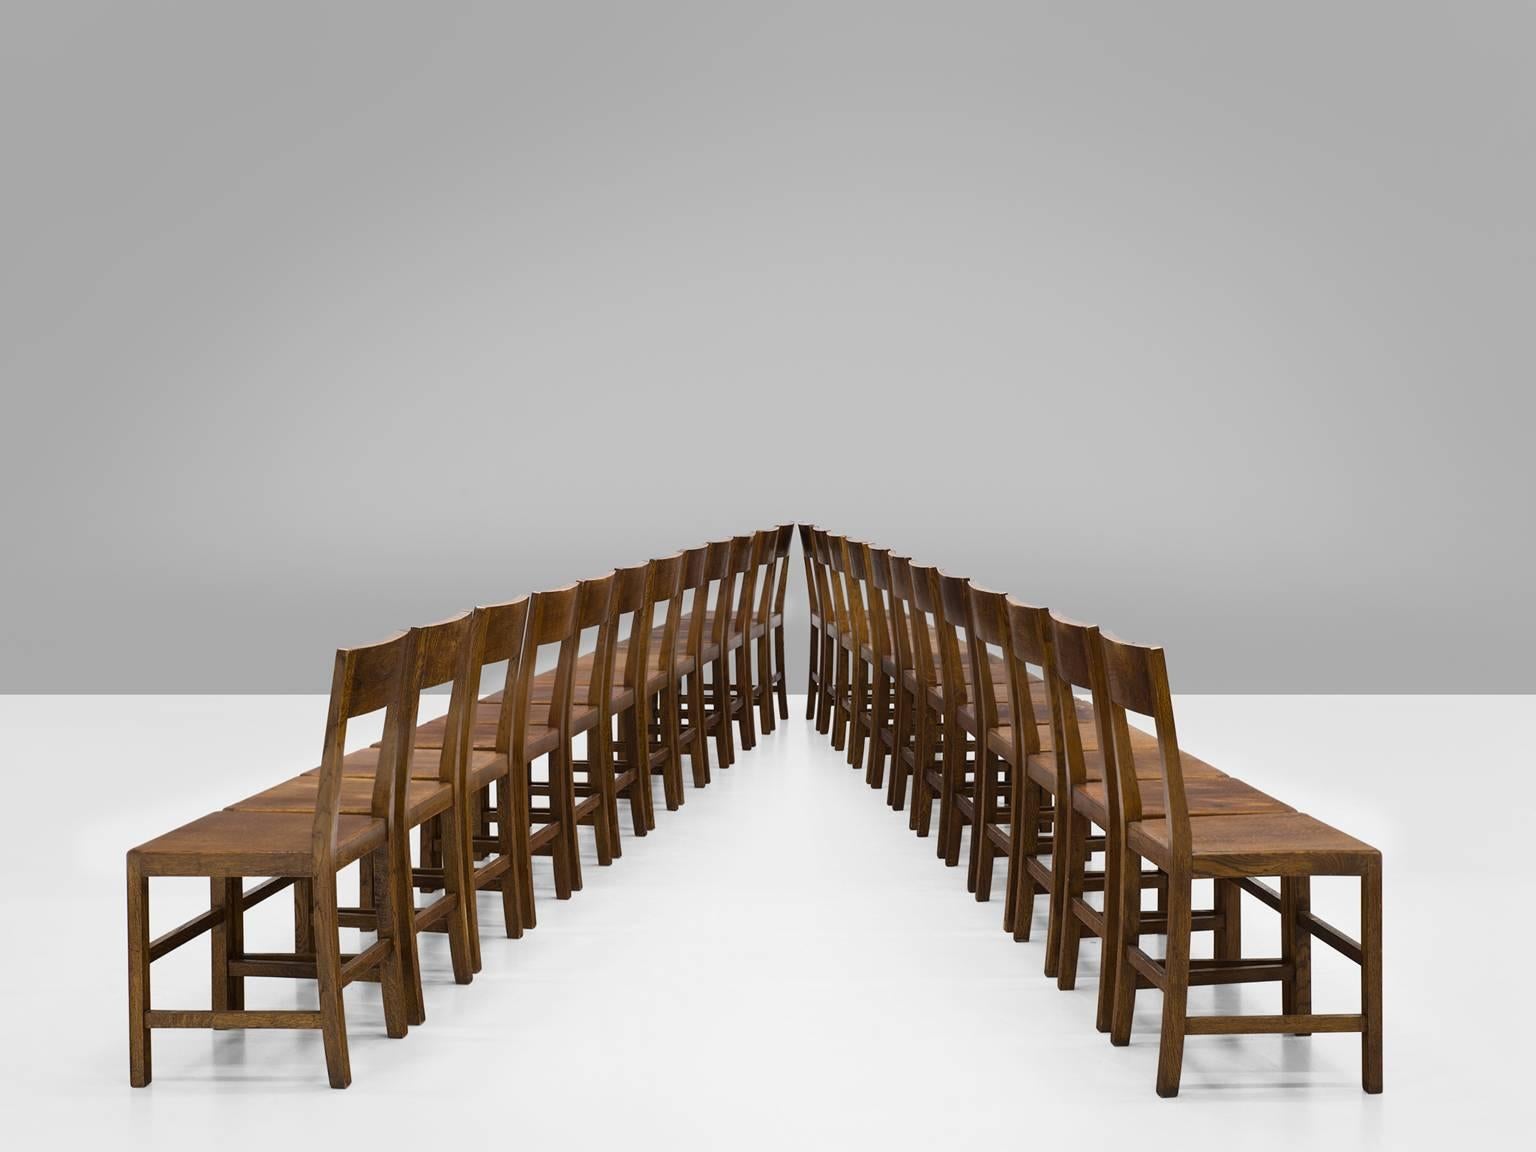 Large set of chairs, oak, Belgium, 1940s.

Large set of chairs are executed in aged oak. The chairs have a very solid and geometric backrest. The chairs are both functional and clear in their design, as is common of most Belgian design. The design